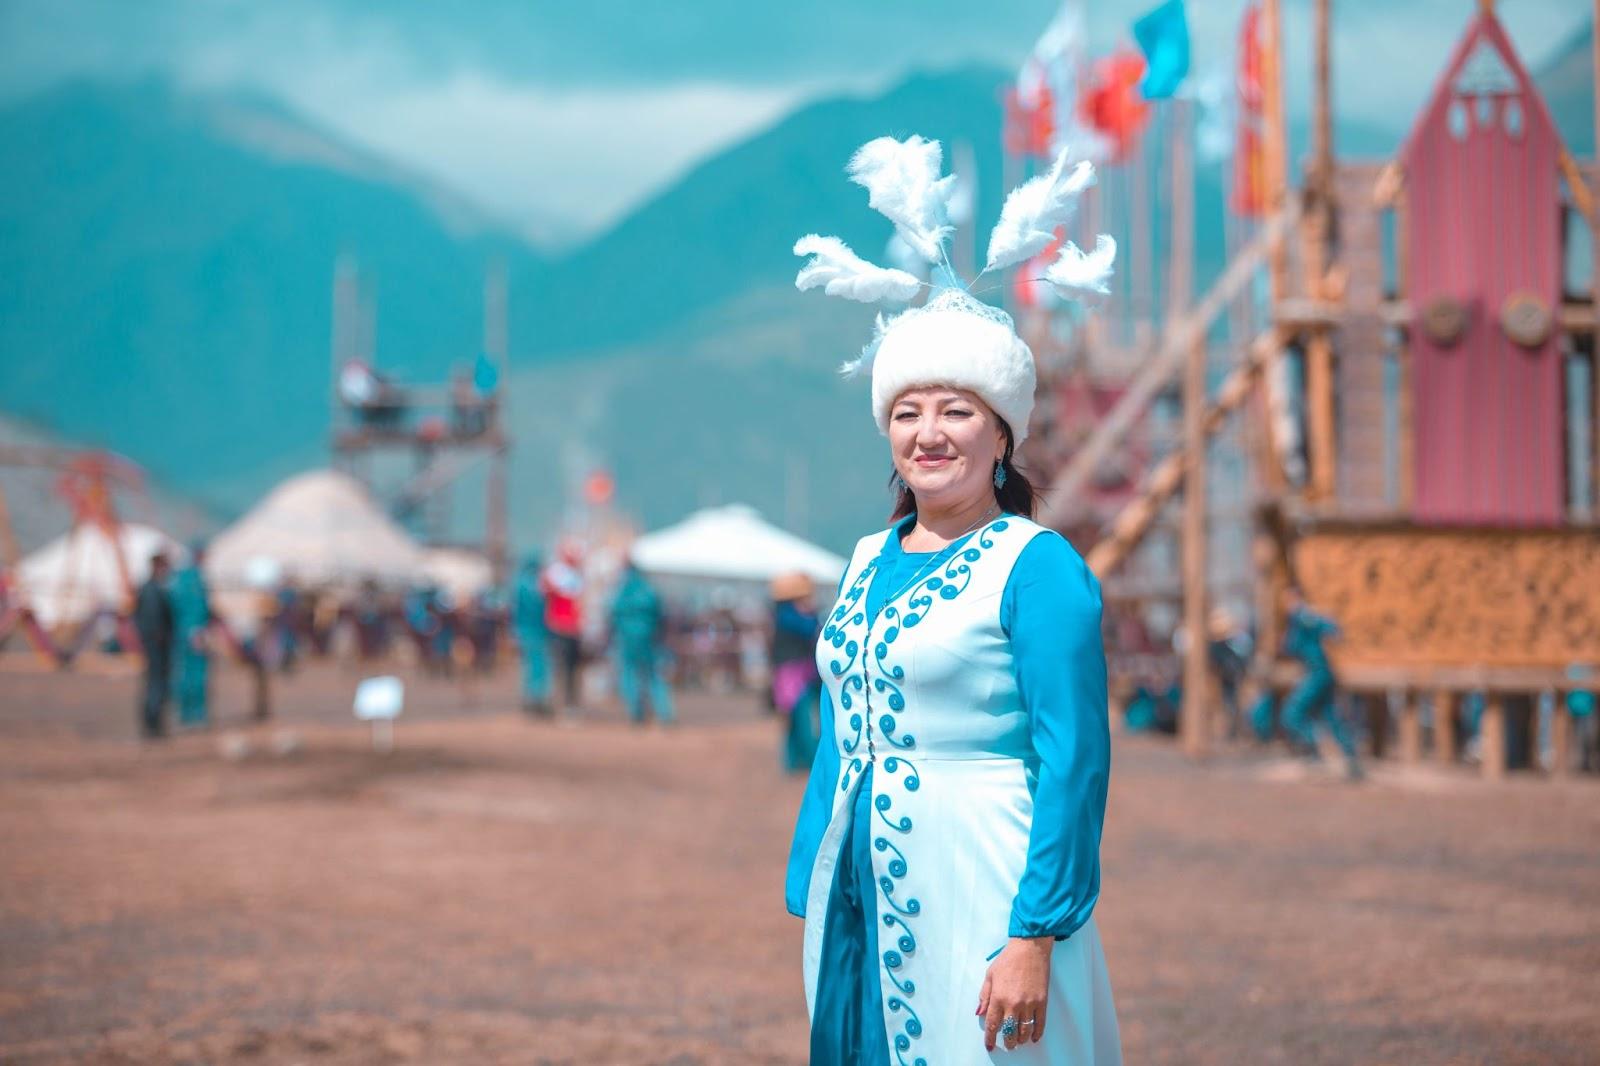 Kyrgyz woman in national dress standing near yurts during World Nomad Games